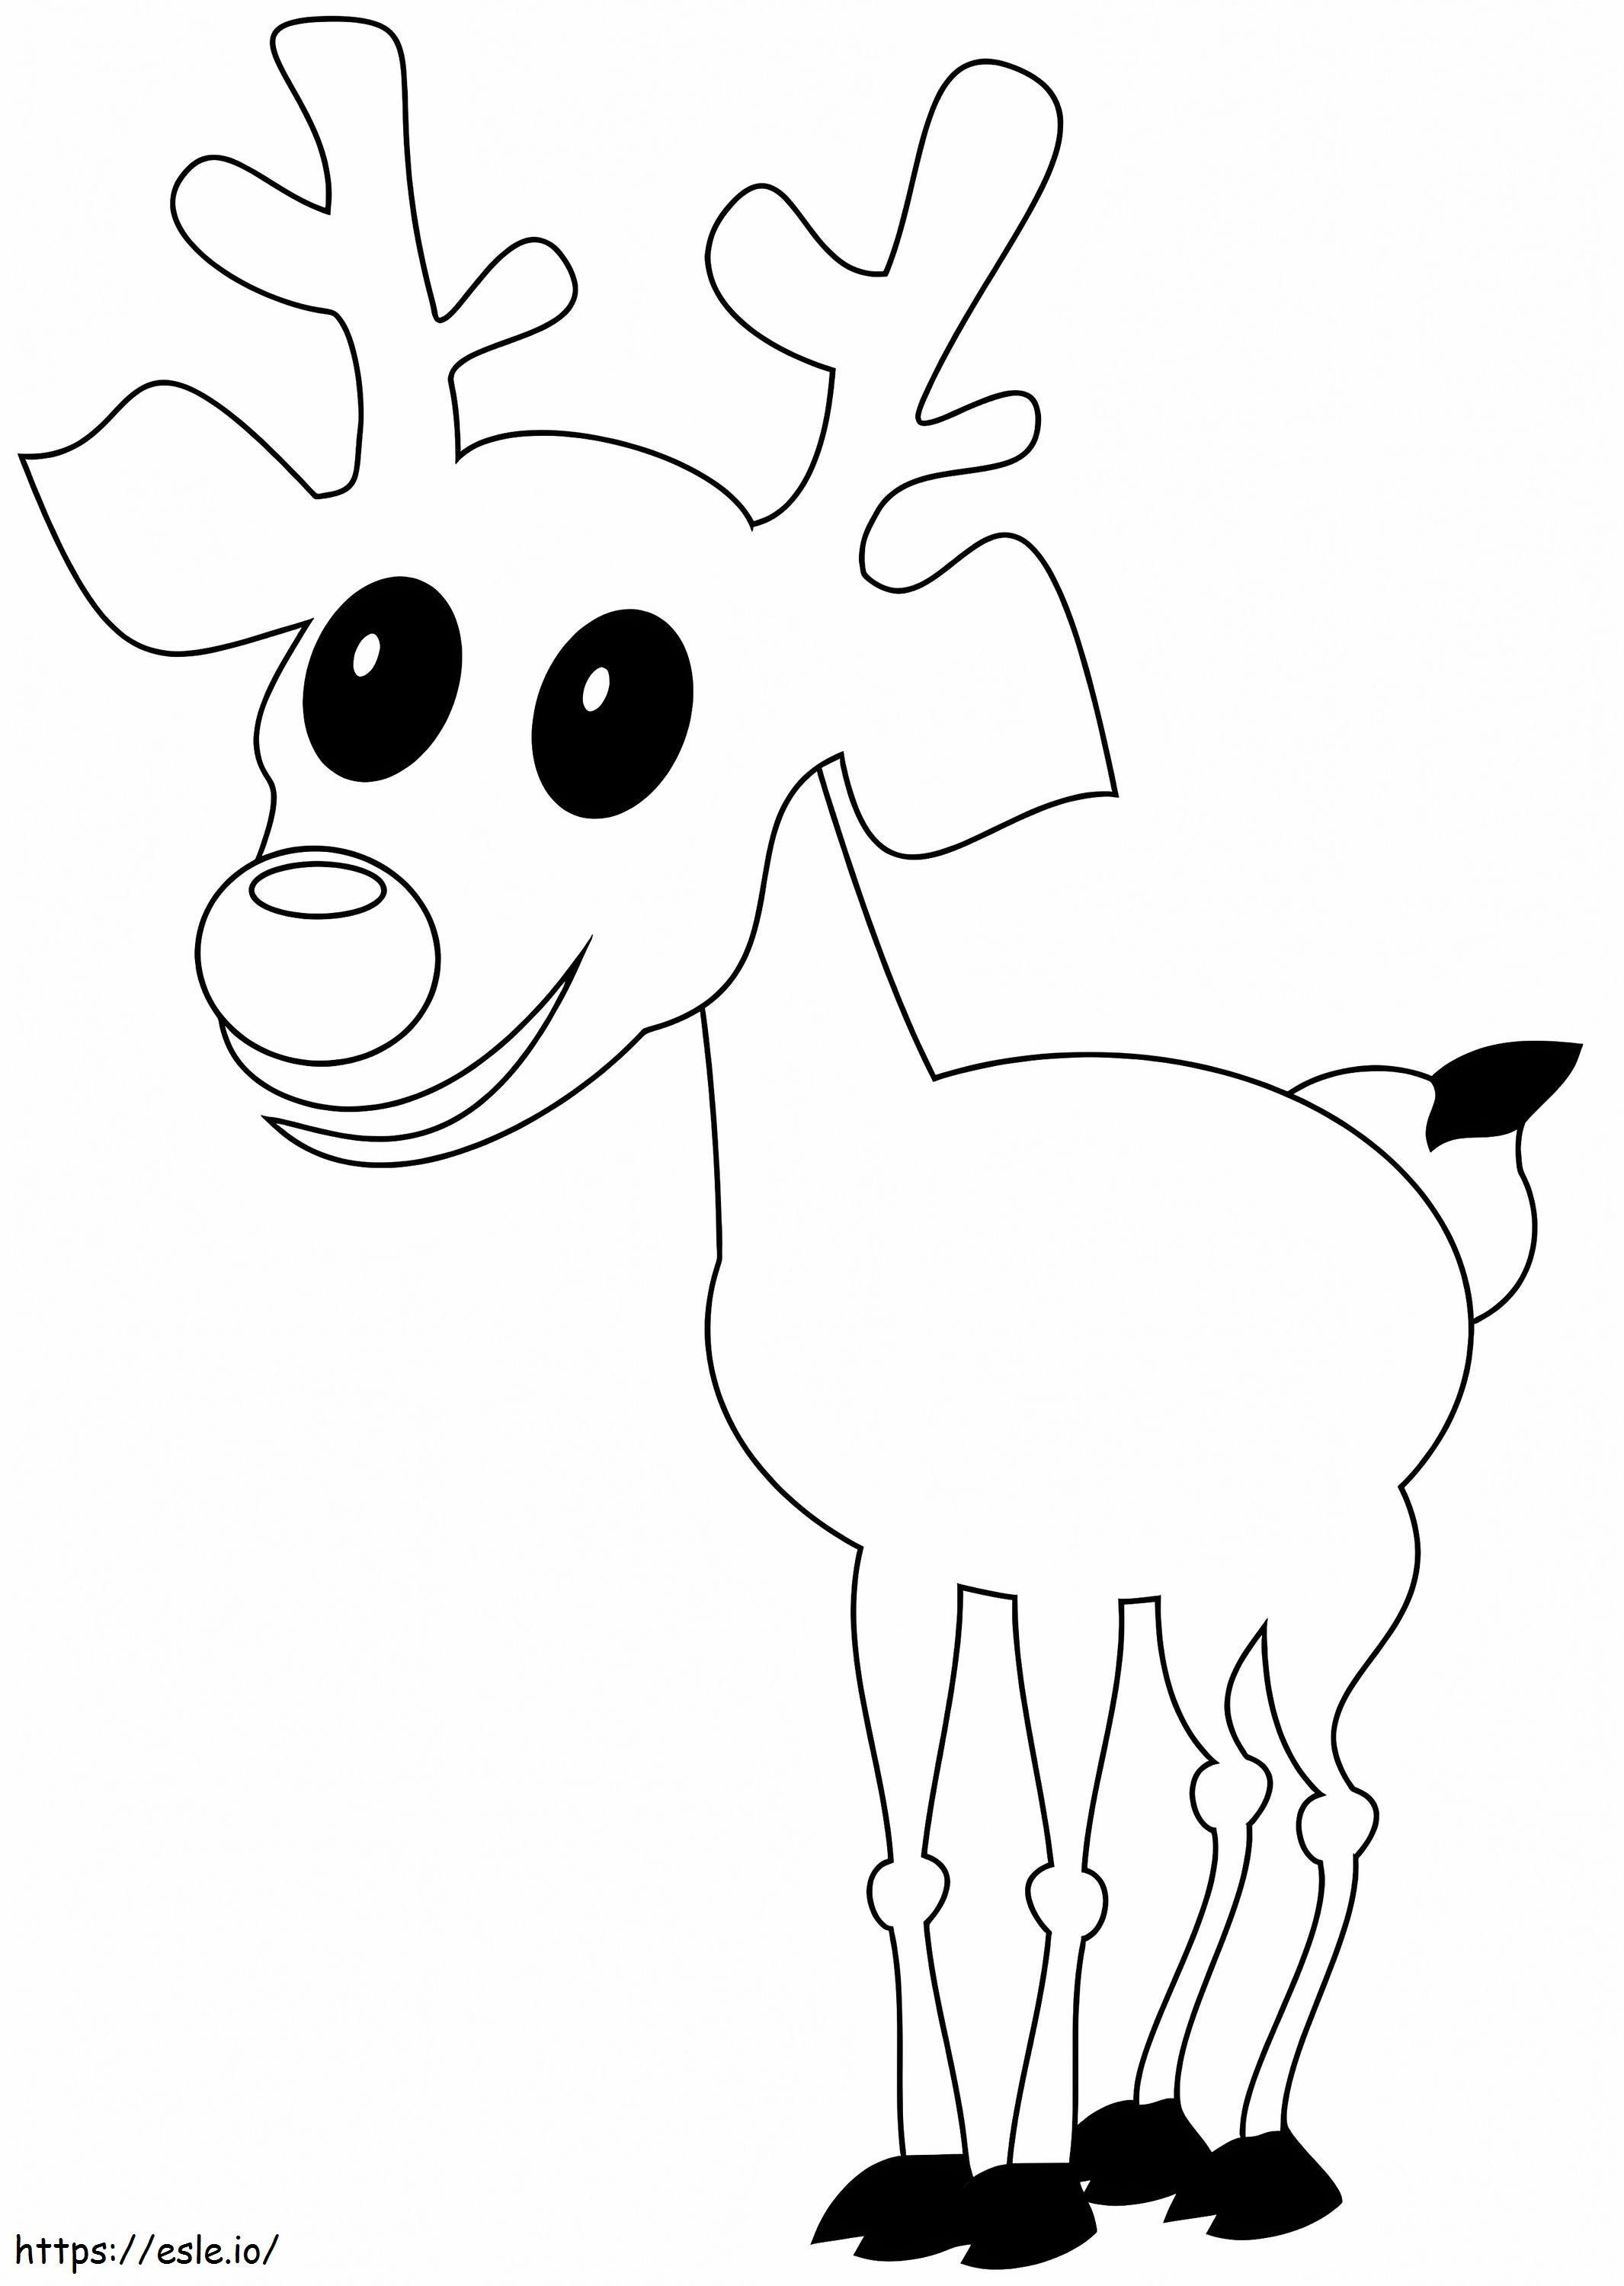 Funny Christmas Reindeer coloring page